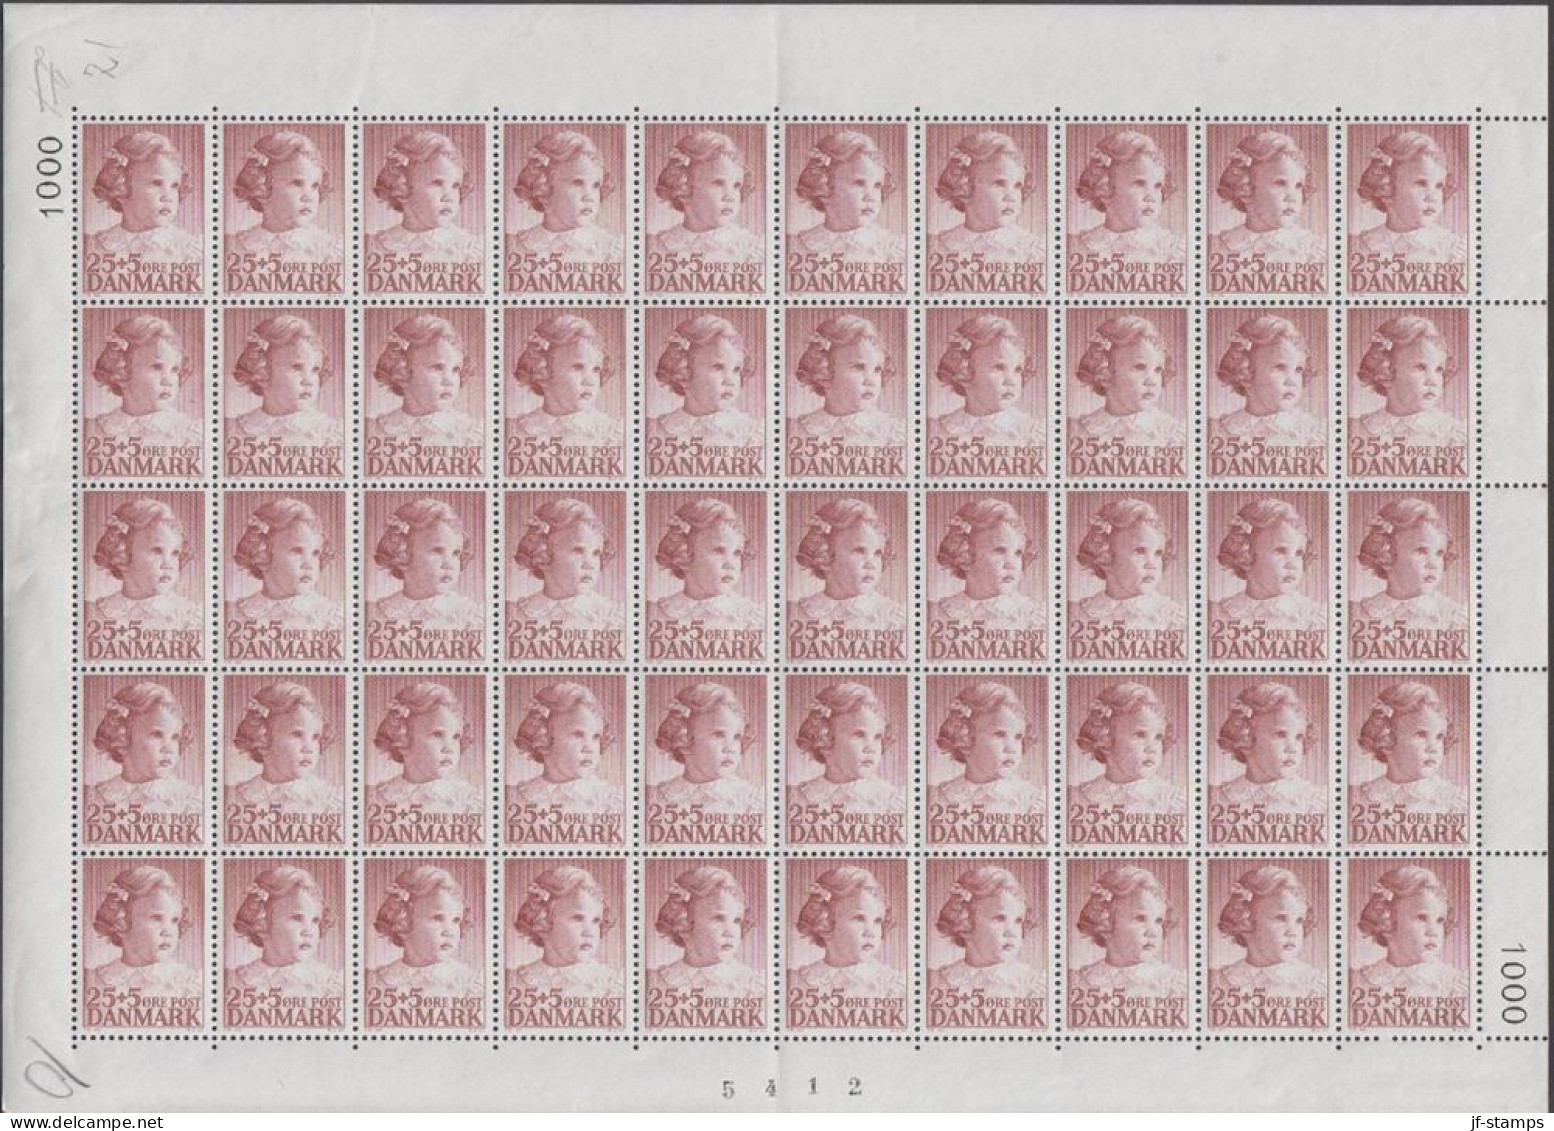 1950. DANMARK. 25 + 5 ØRE ANNE-MARIE In Never Hinged Sheet (50 Stamps) With Margin Number 100... (Michel 322) - JF538679 - Covers & Documents